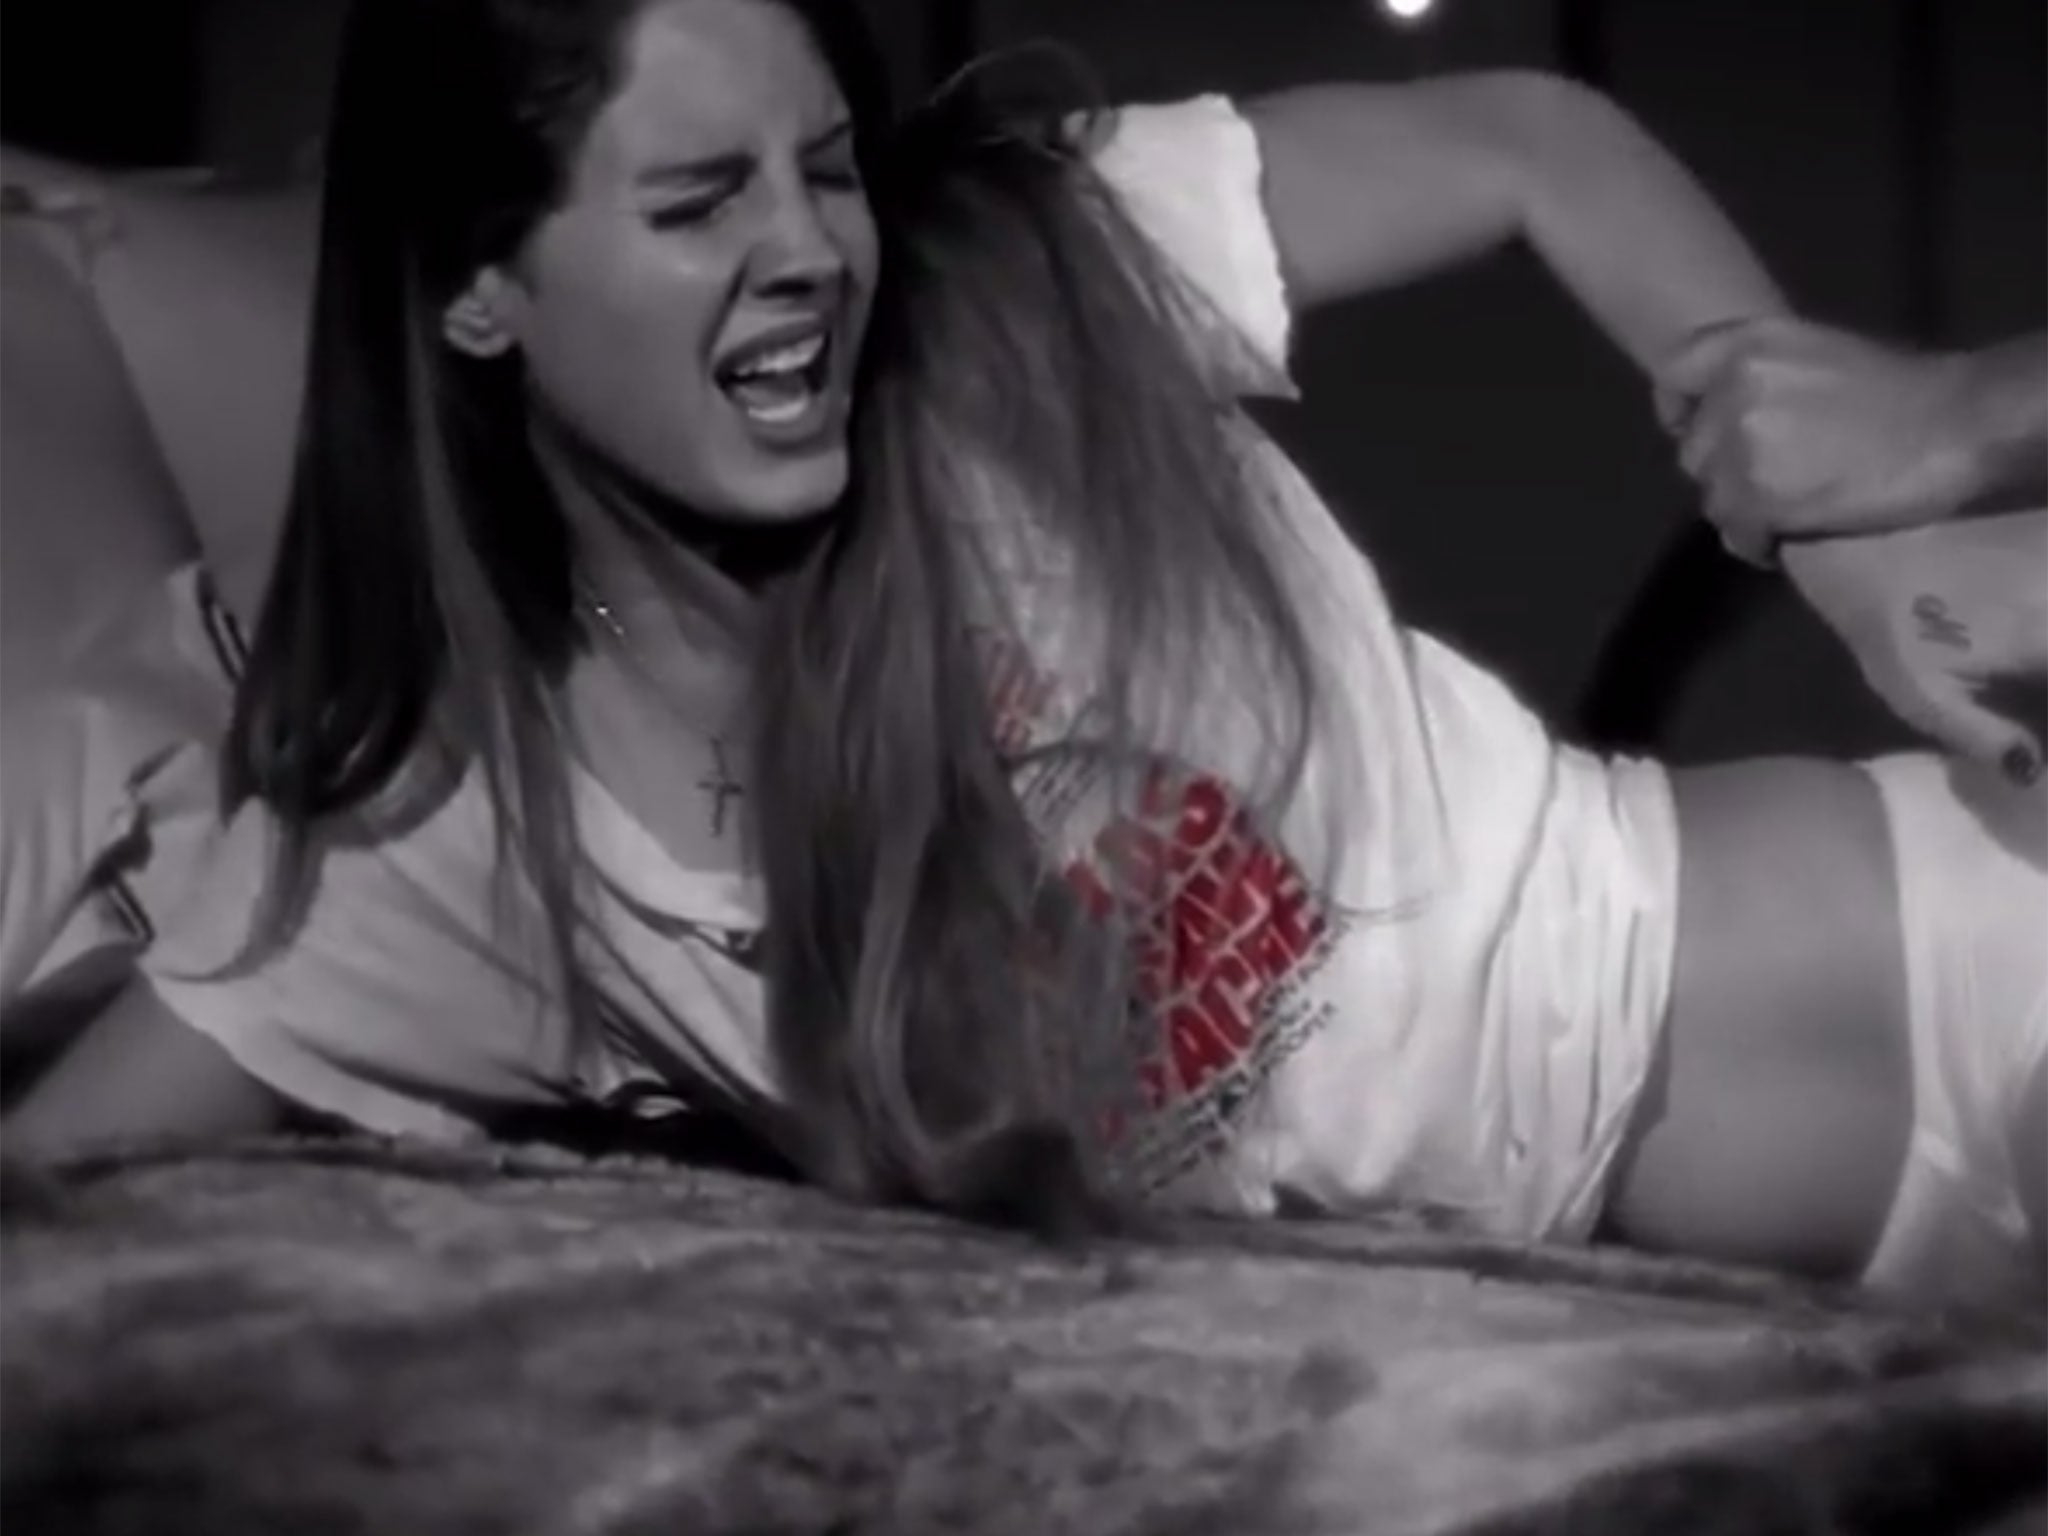 Lana Del Rey is seen being sexually assaulted in a video also featuring Marilyn Manson